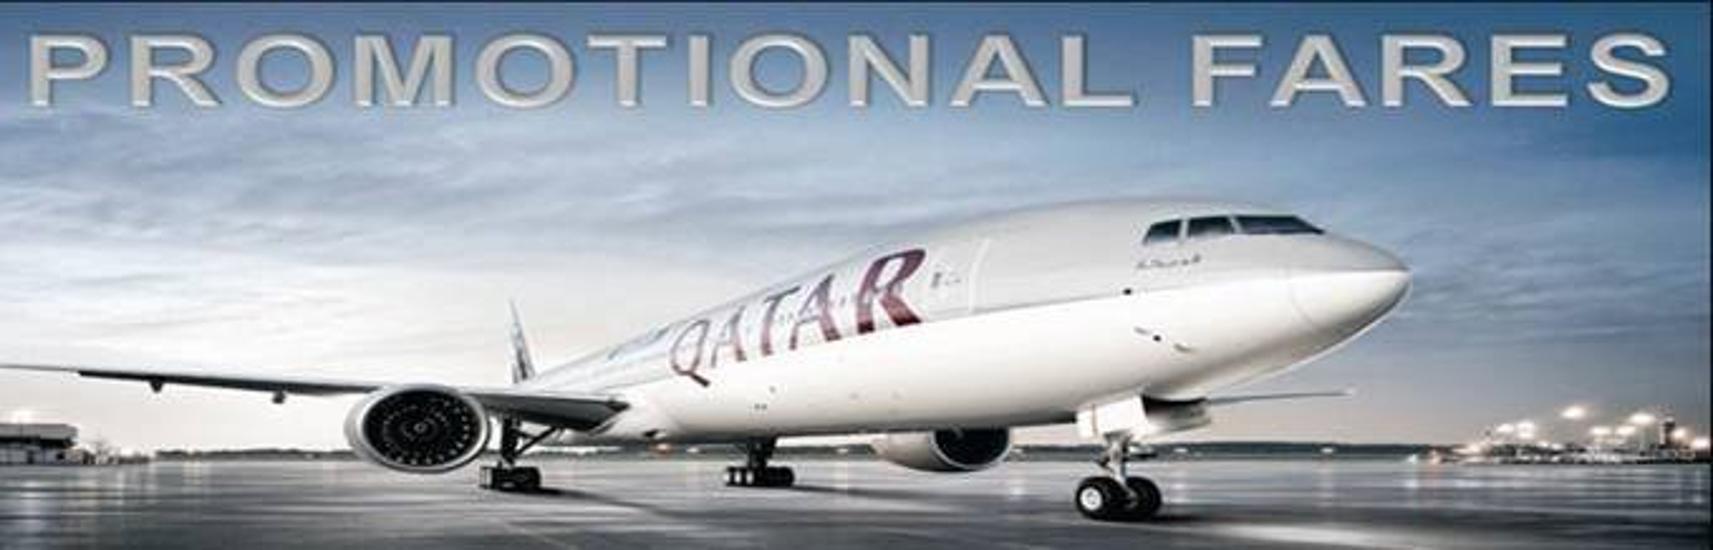 Fantastic Spring Promotion From Qatar Airways In Hungary